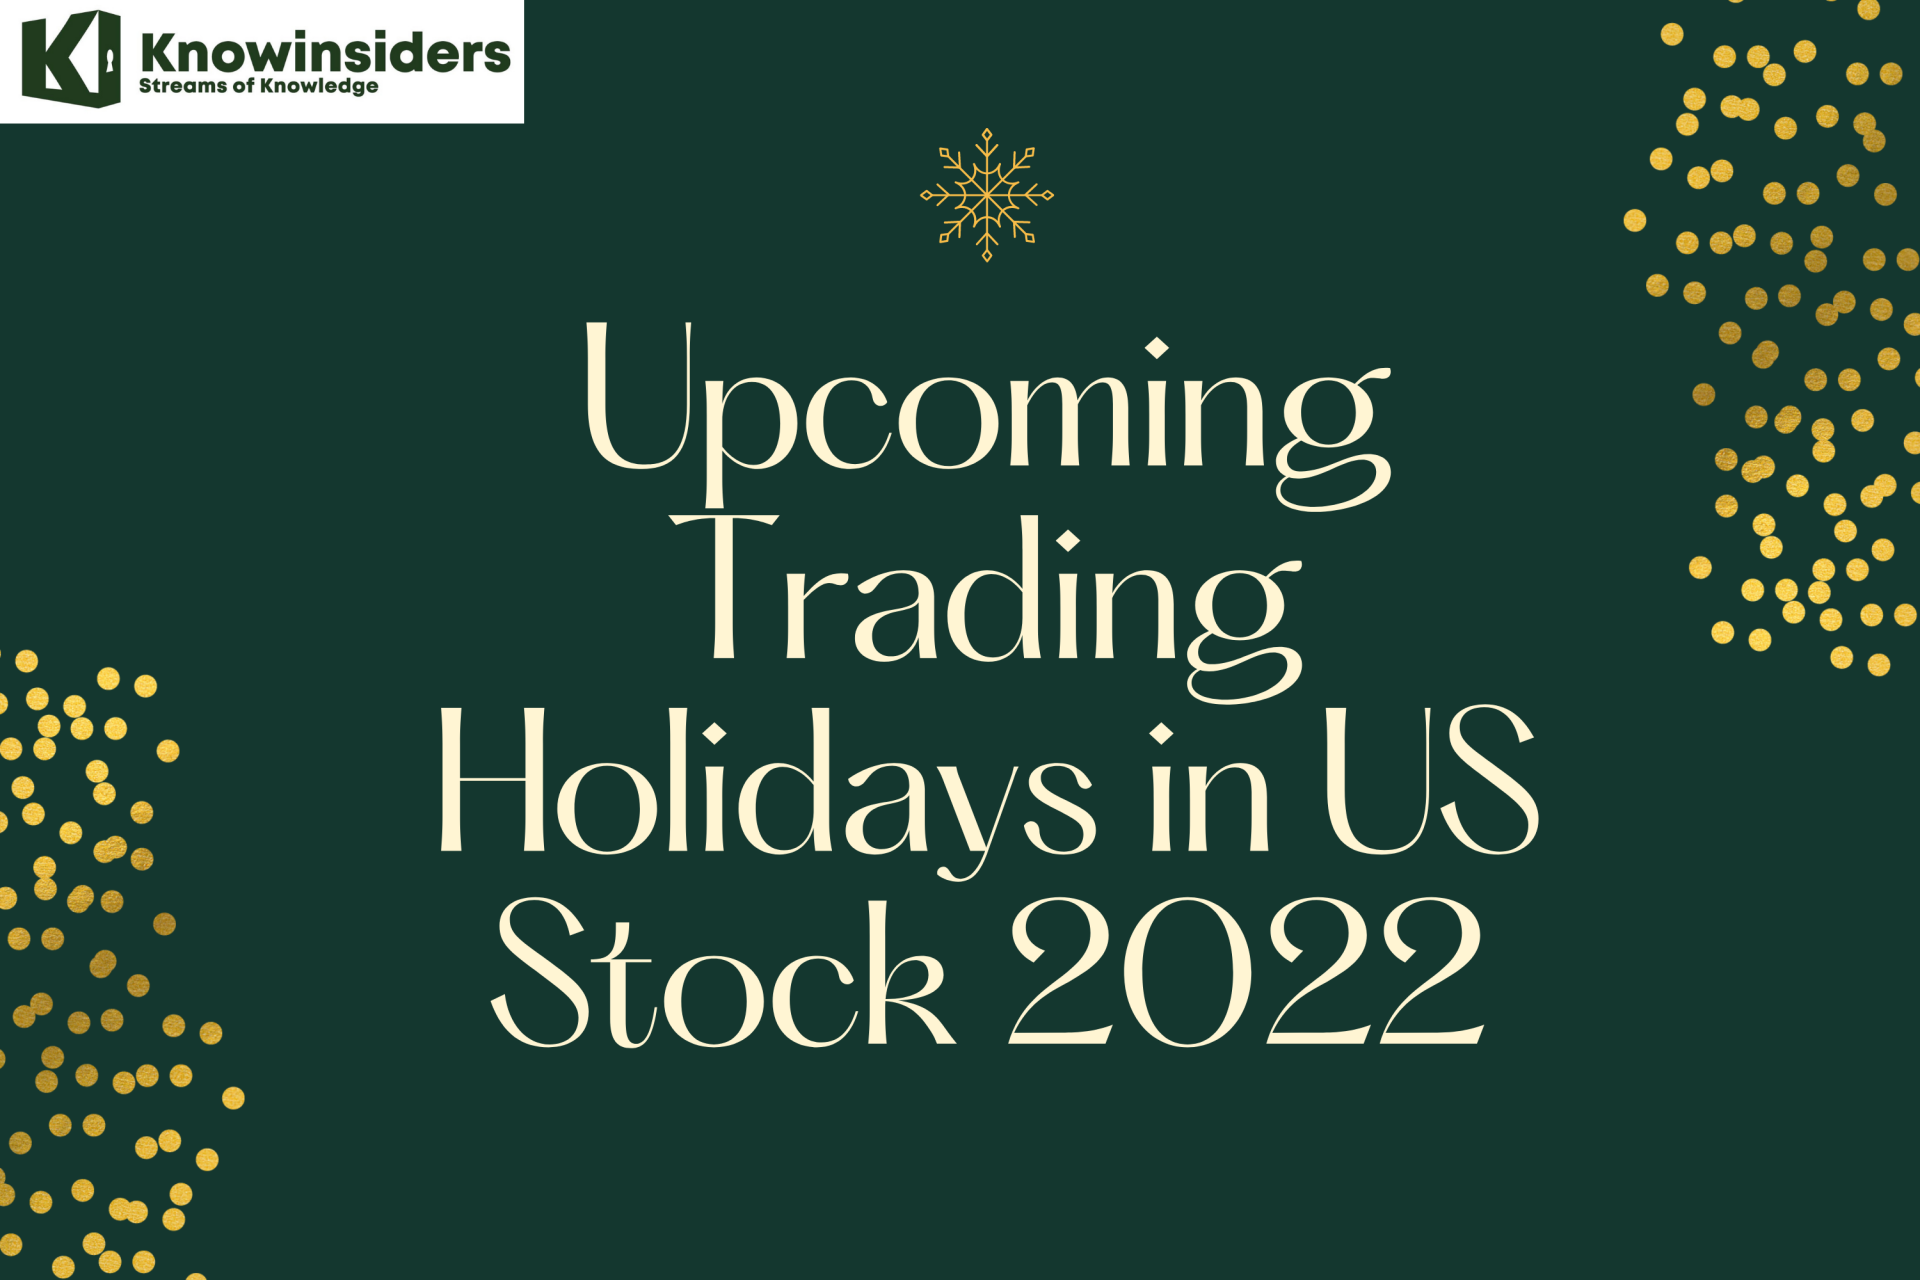 What Holidays are the U.S Stock Market Closed